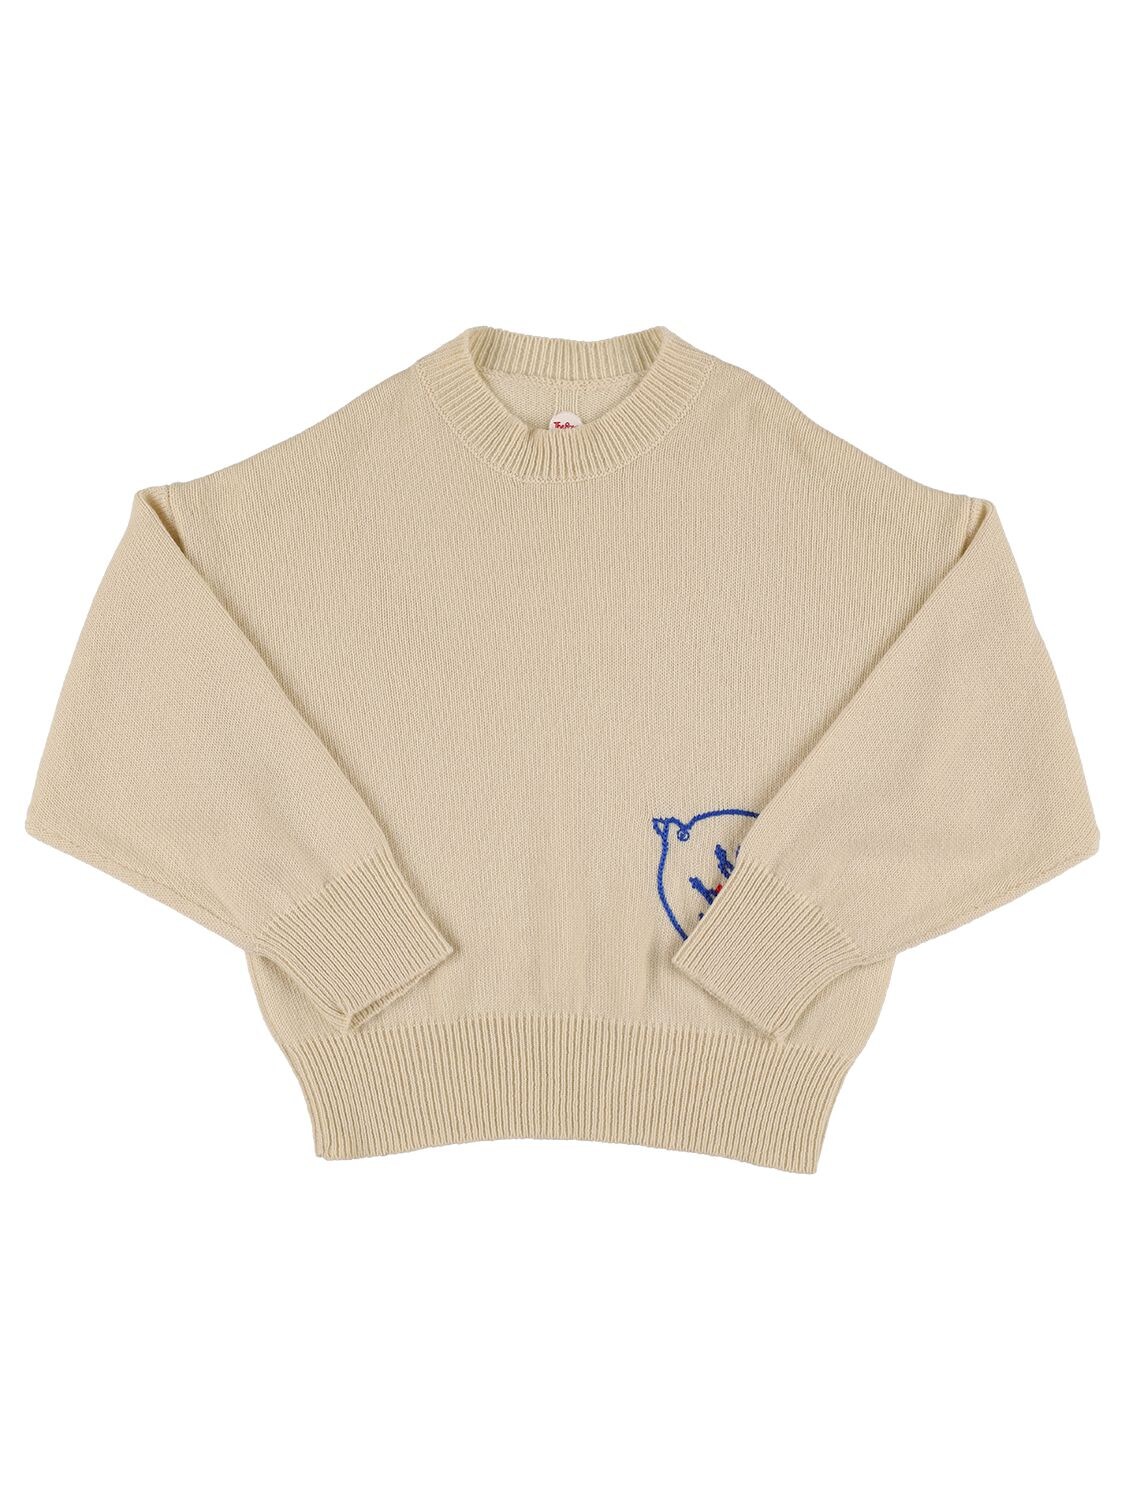 Cashmere Knit Sweater